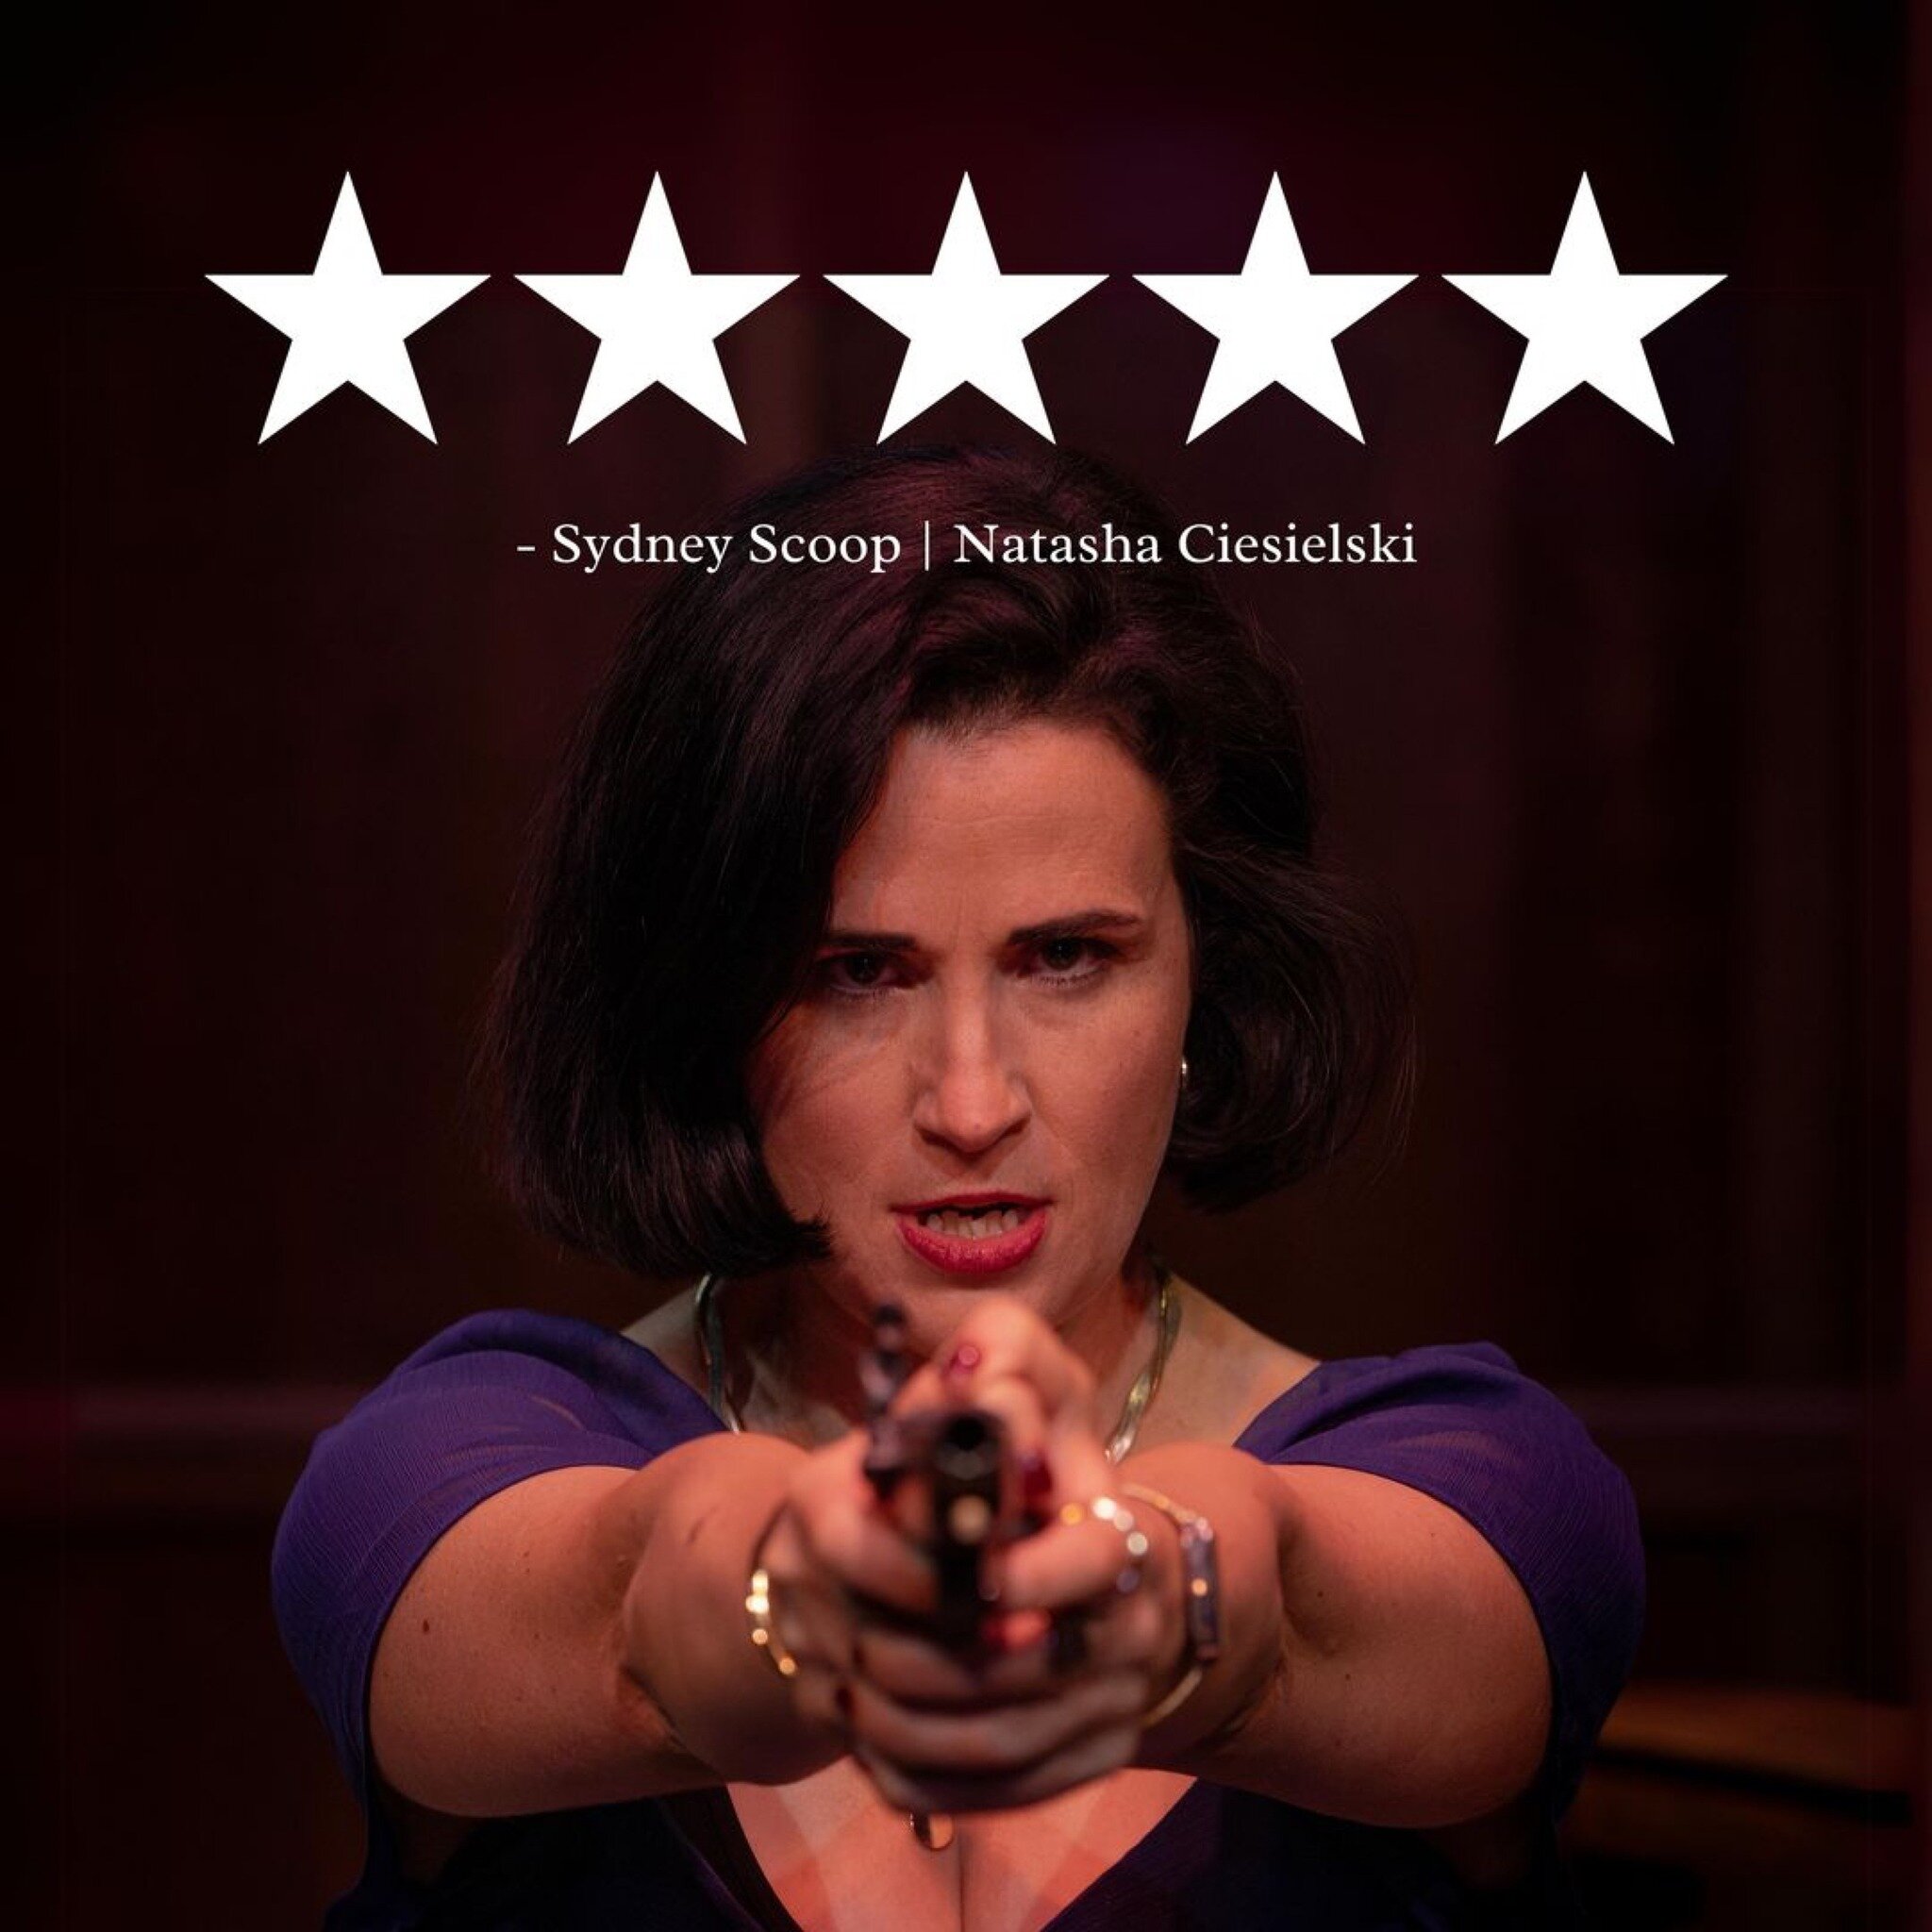 ⭐⭐⭐⭐⭐ 5 Stars for Frame Narrative! Boom! 

&ldquo;All of the cast members give stellar performances. Frame Narrative is perfect for art loving audiences who will enjoy unexpected story twists and a clever deconstruction of narrative. Five stars.&rdqu